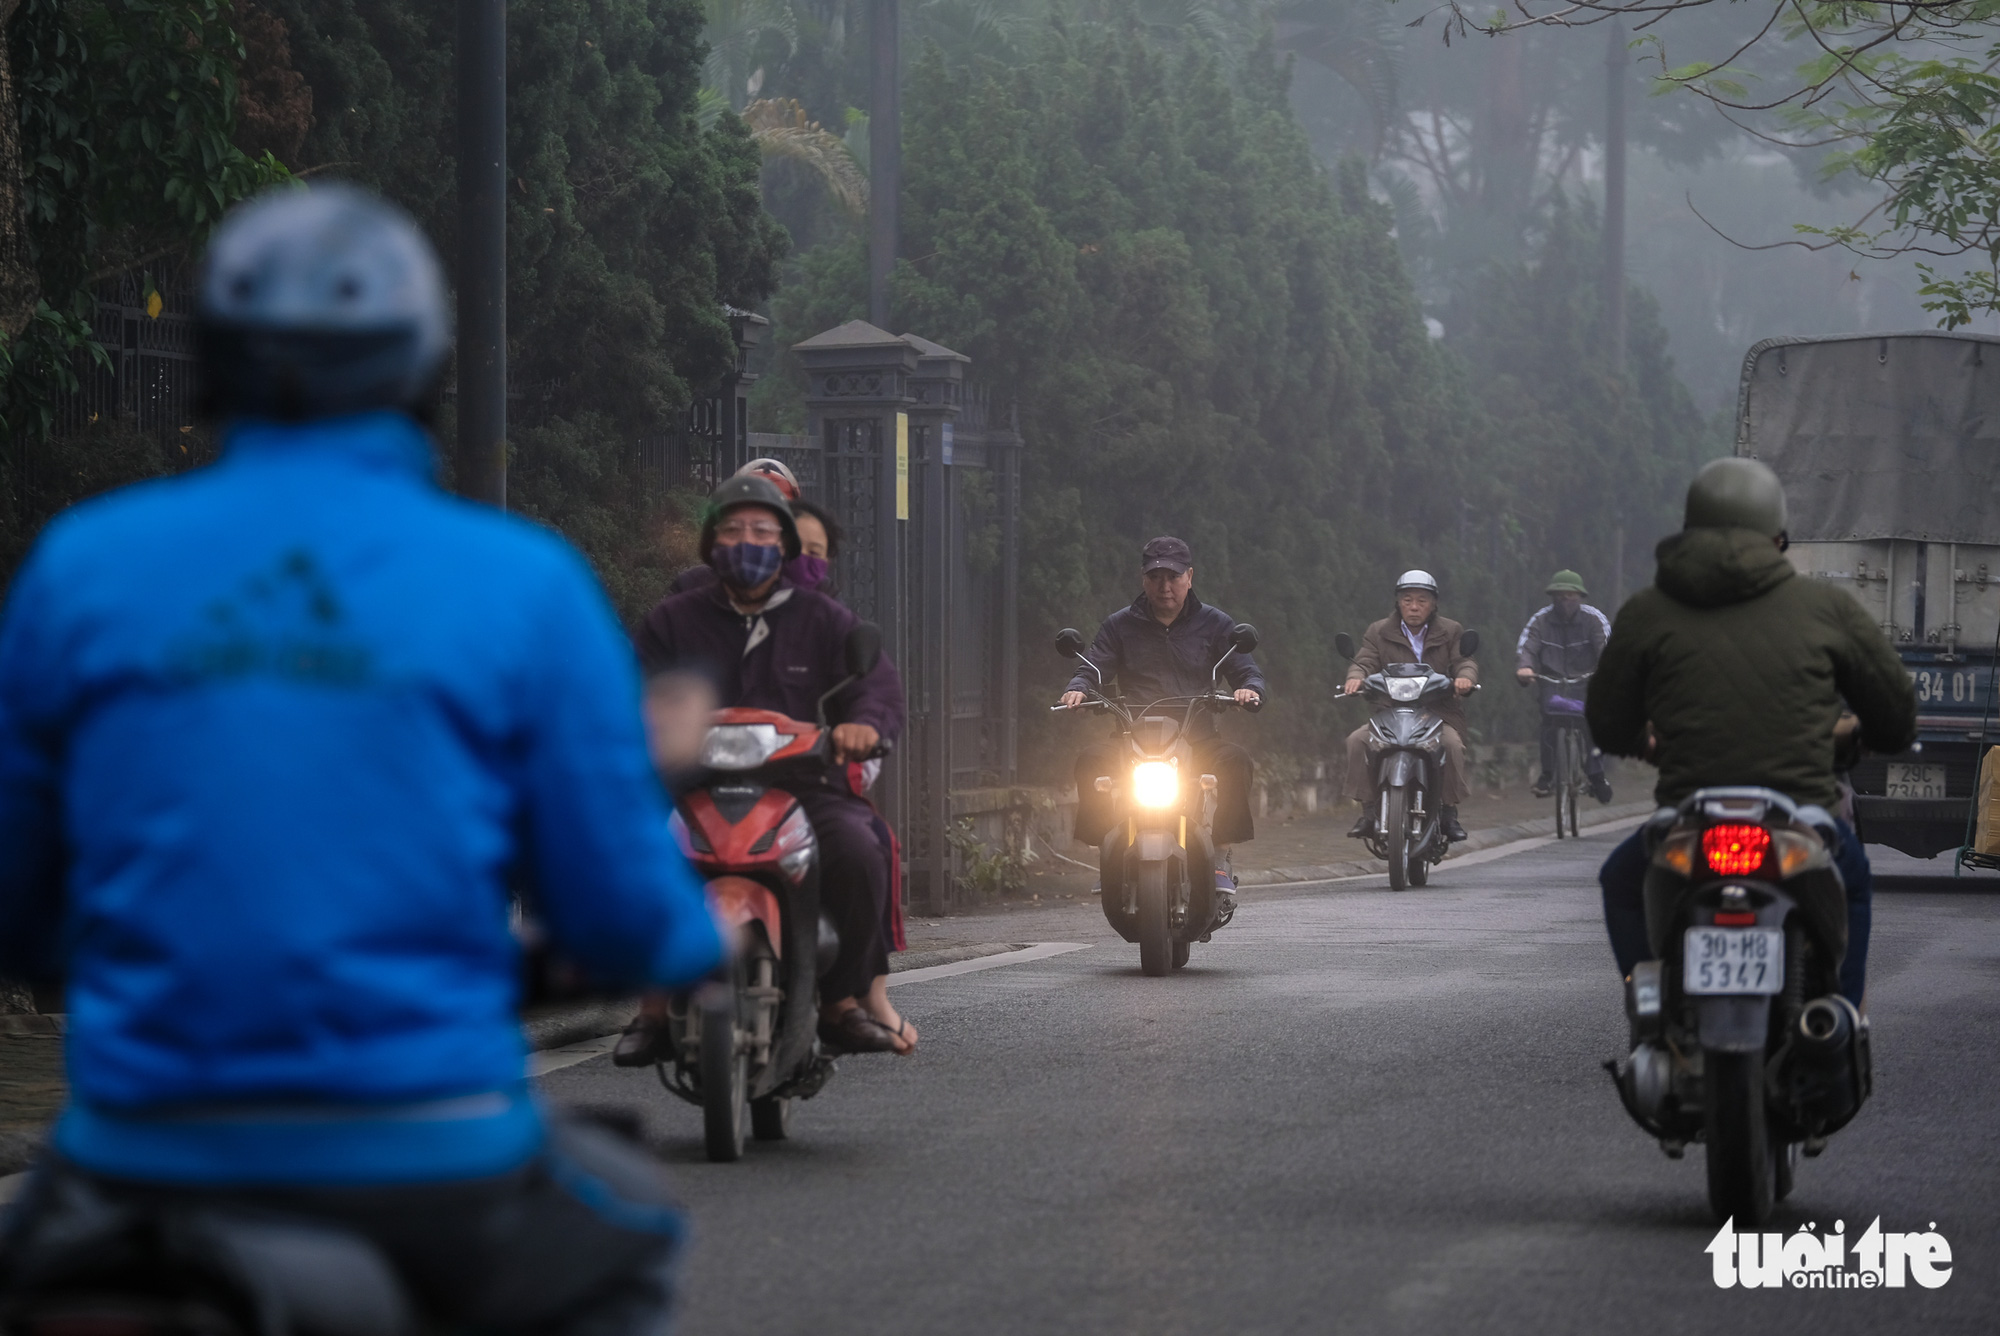 Commuters turn on their headlights in the foggy weather in Hanoi on December 24, 2019.